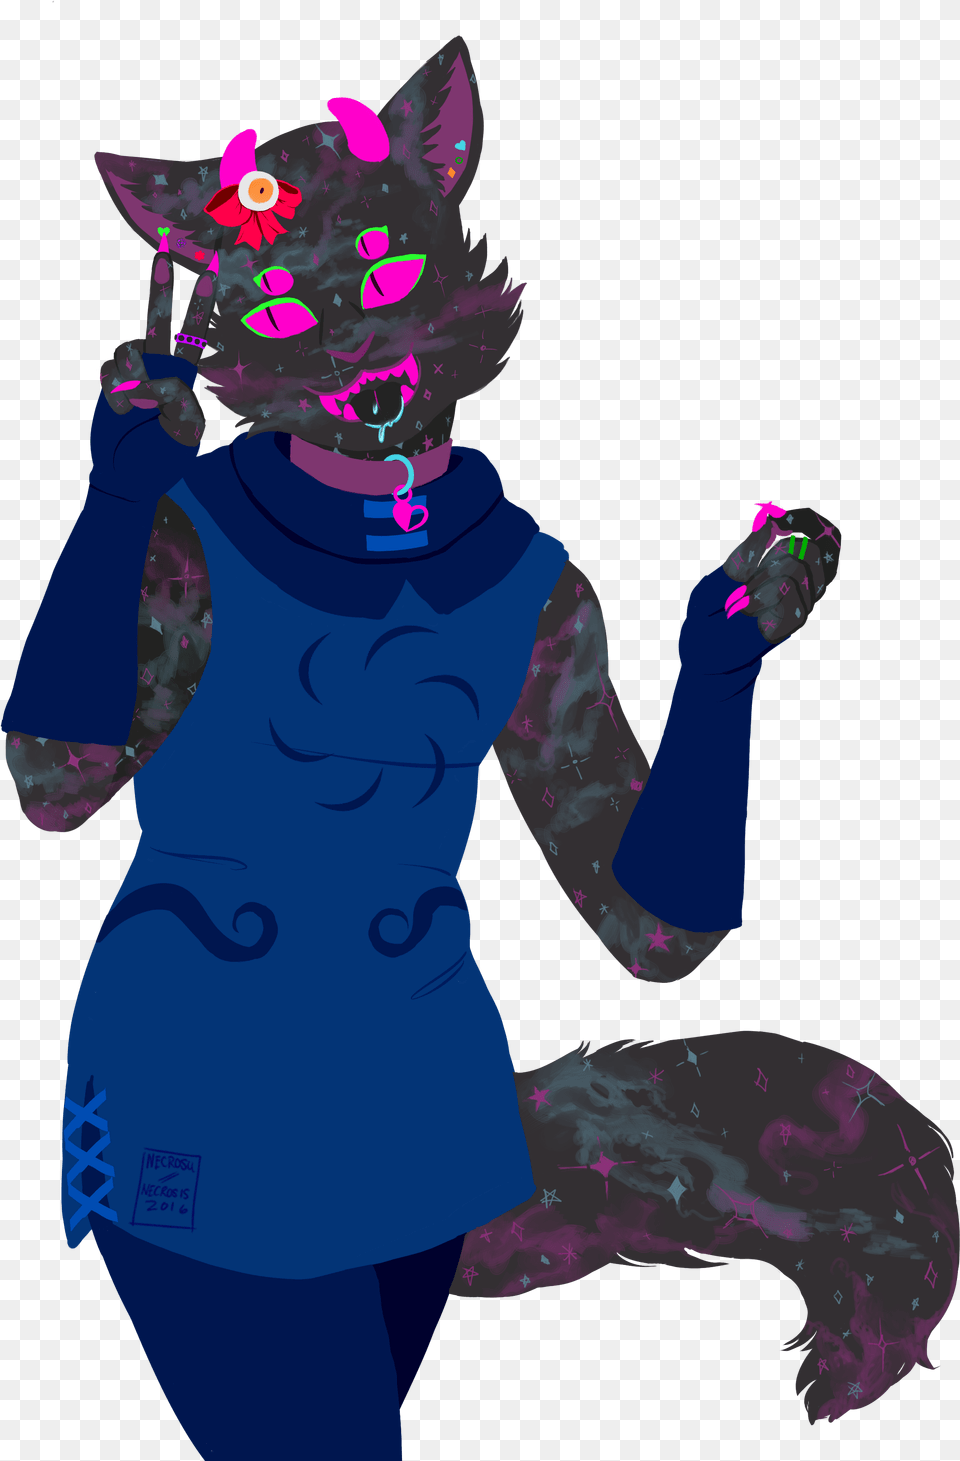 Download Gay Space Furry Gay Full Size Image Pngkit Gay Furry Transparent, Purple, Baby, Person, Clothing Png